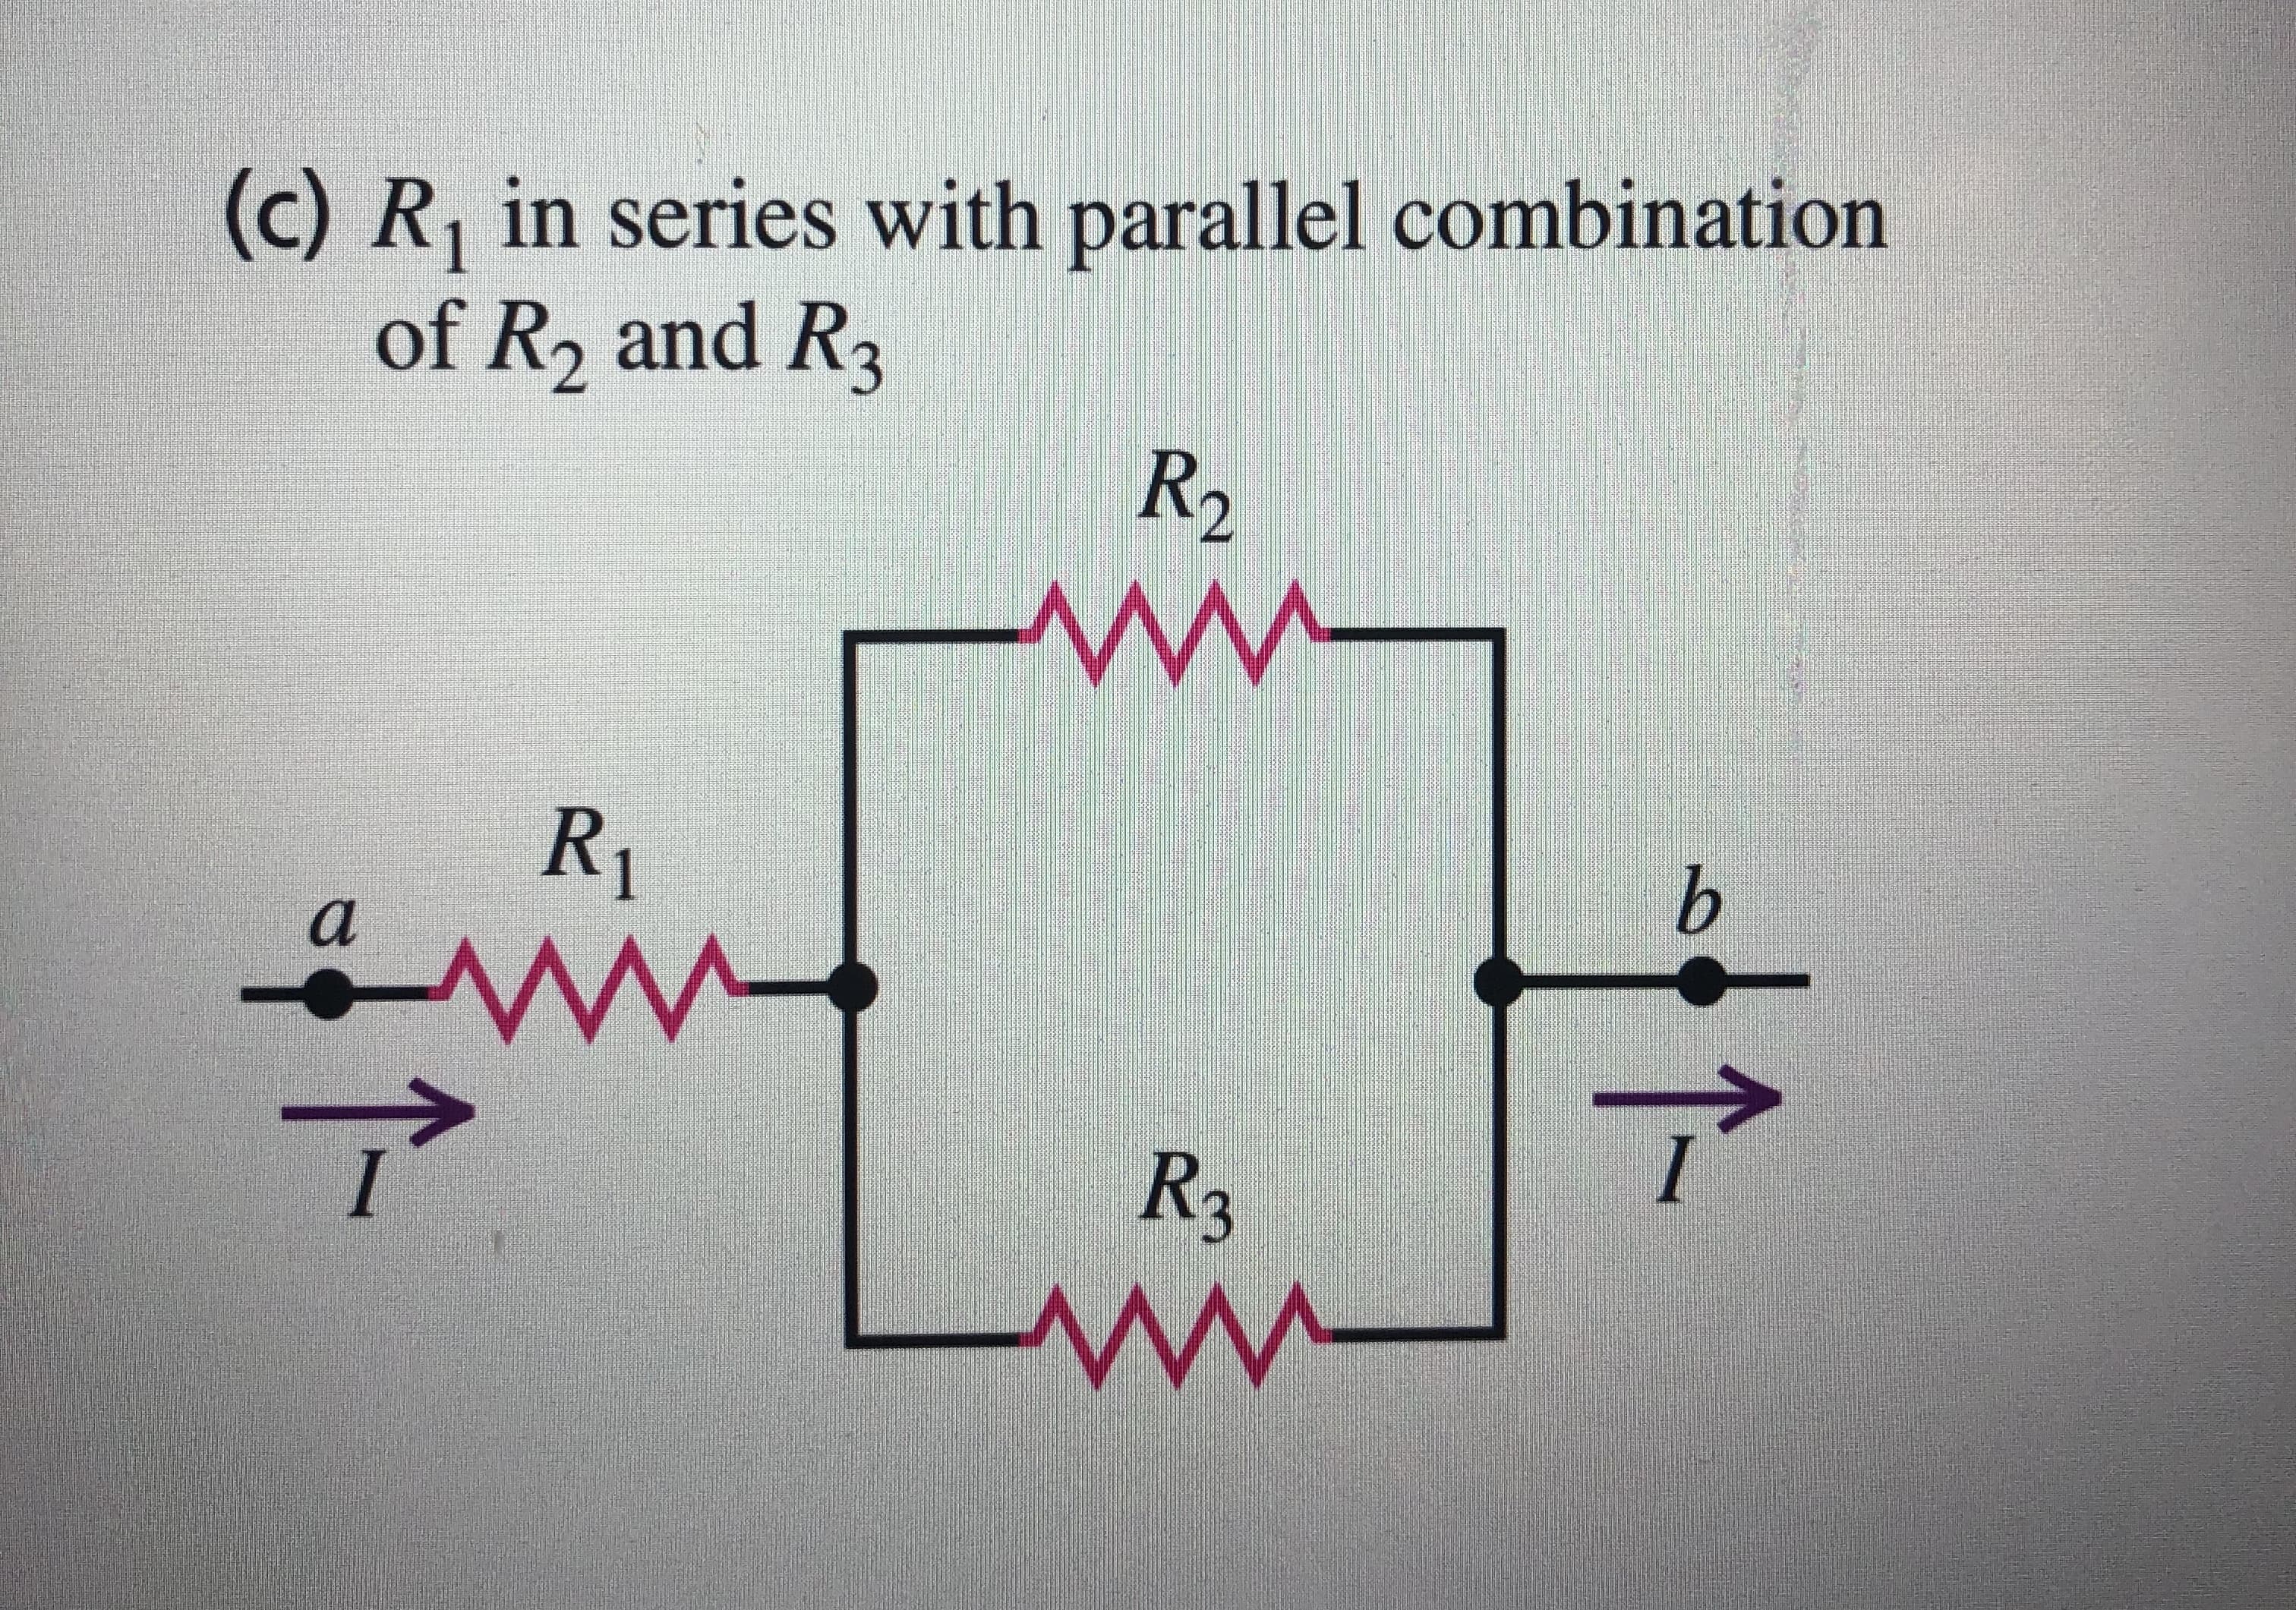 (c) R, in series with parallel combination
of R, and R3
R2
R1
b.
R3
